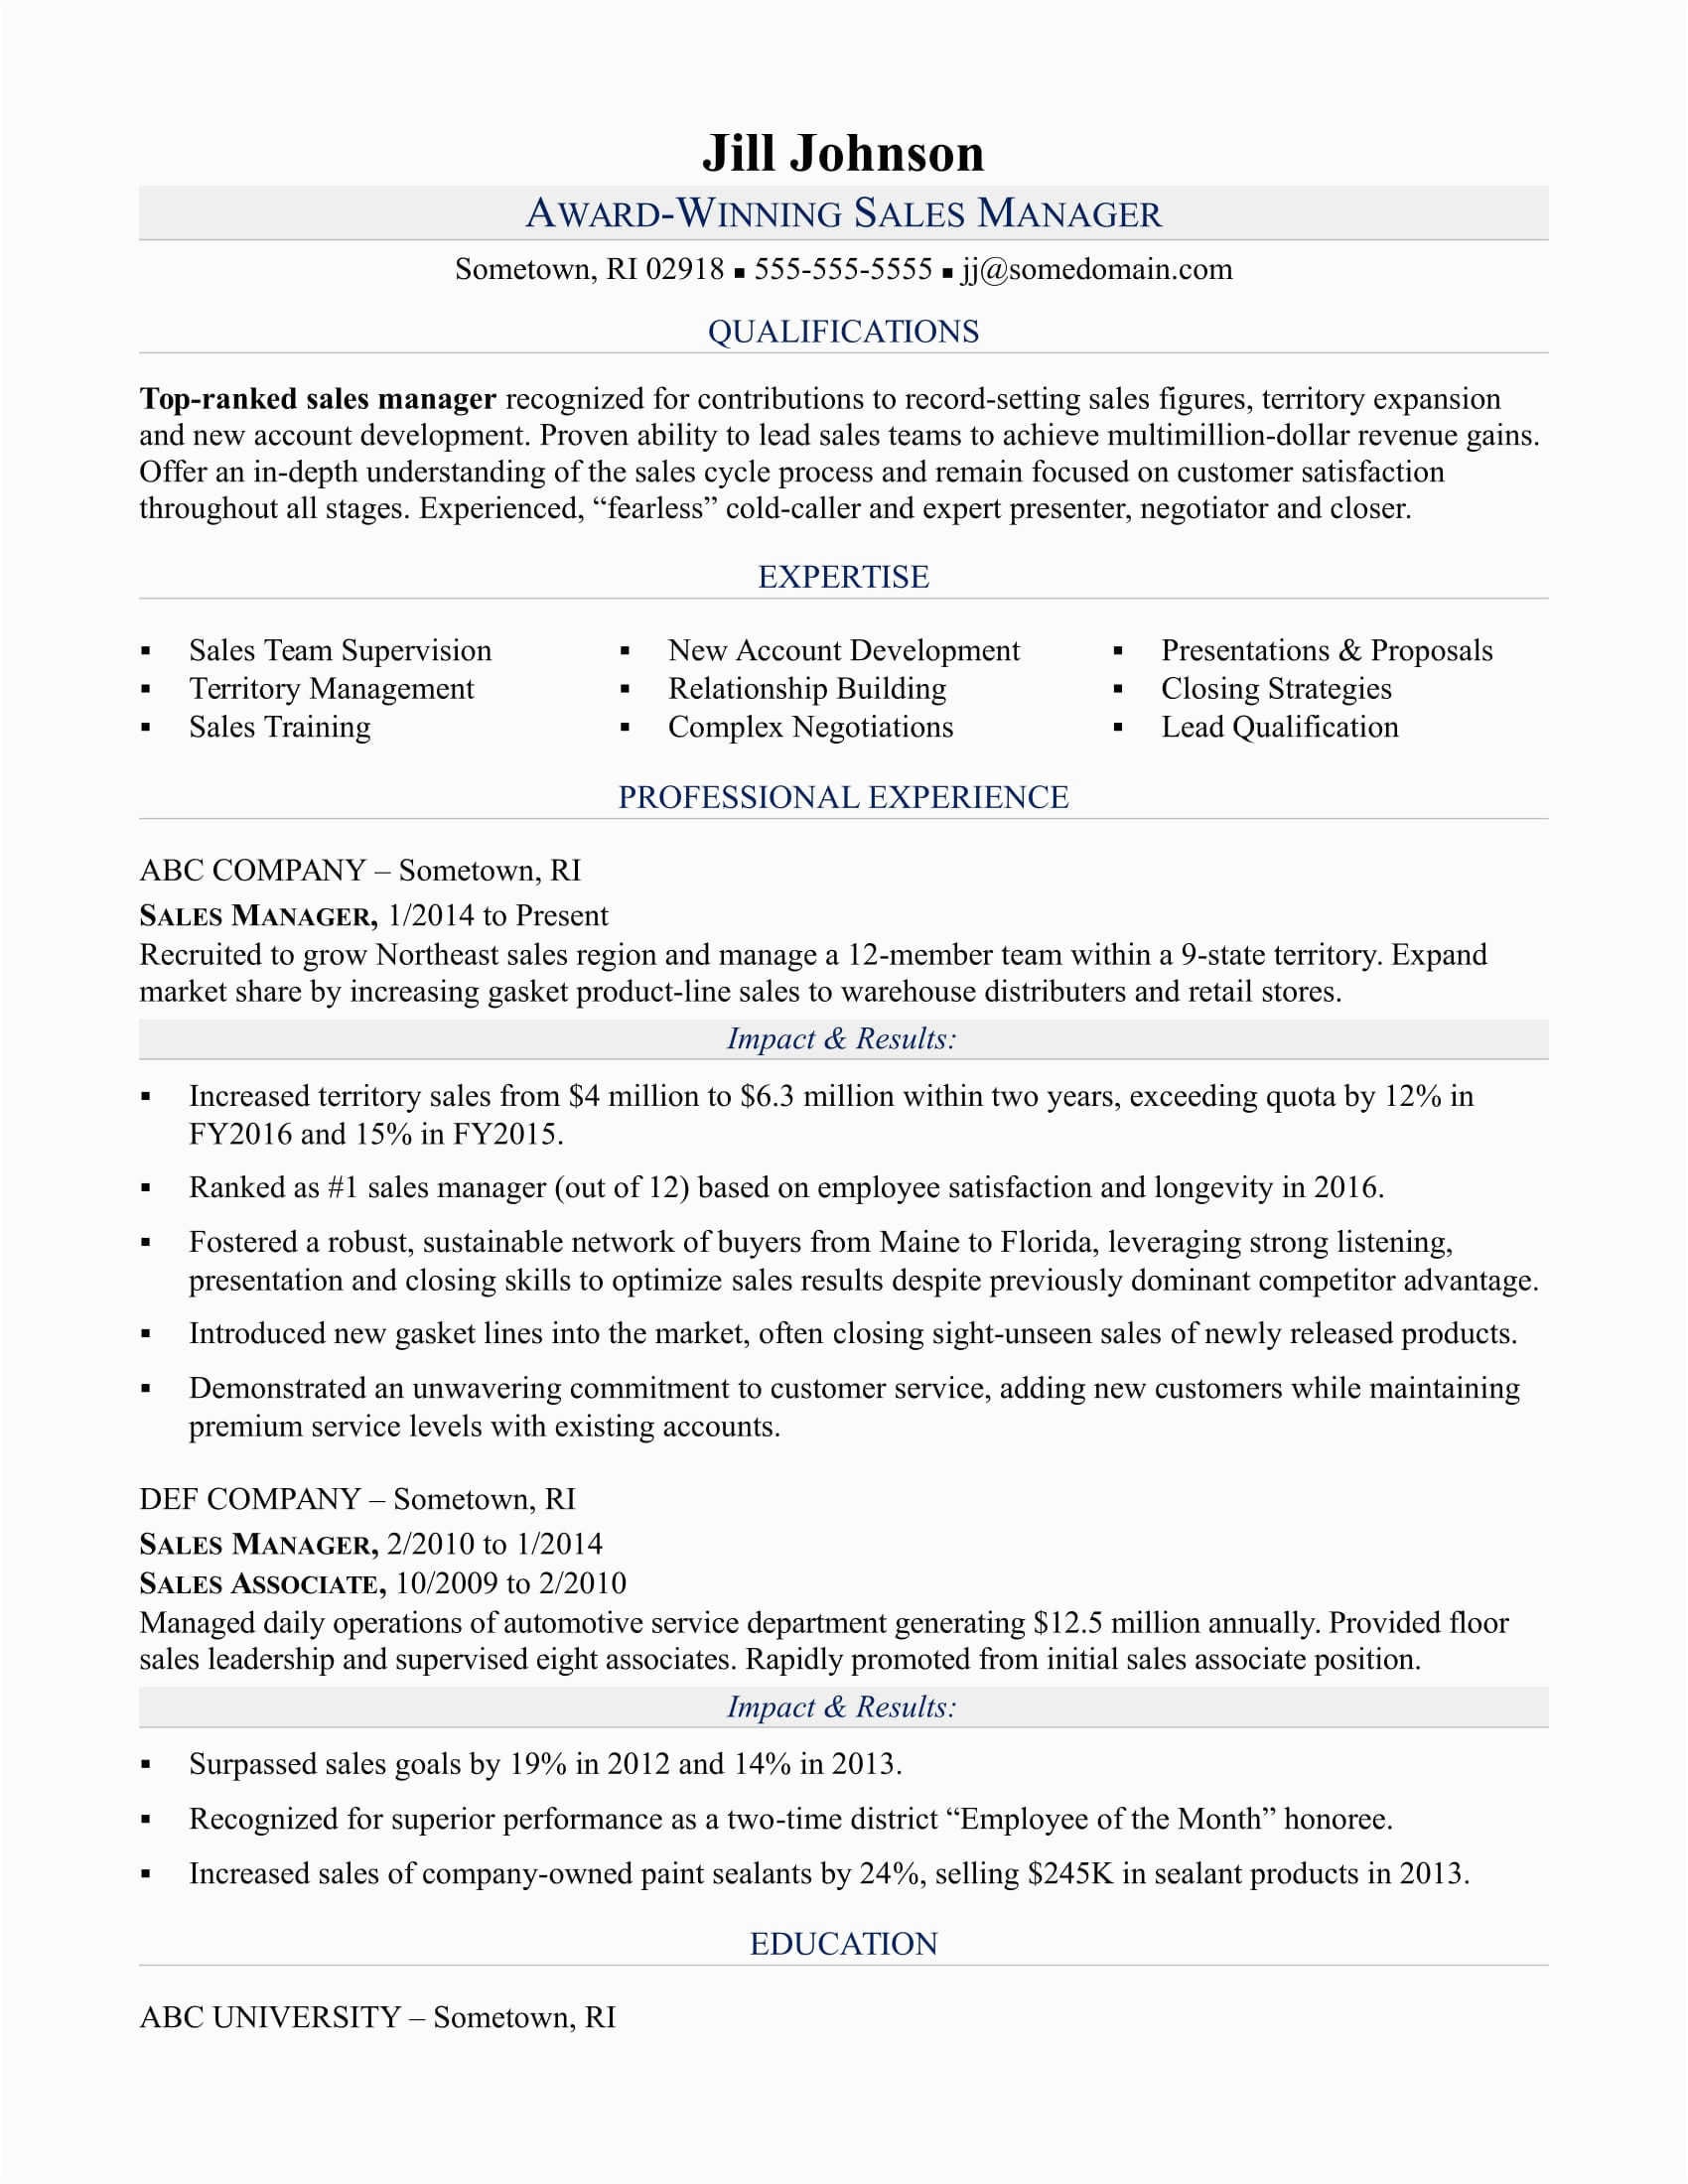 Sample Resume for Automobile Sales Executive Sales Manager Car Dealership Resume Resume Templates